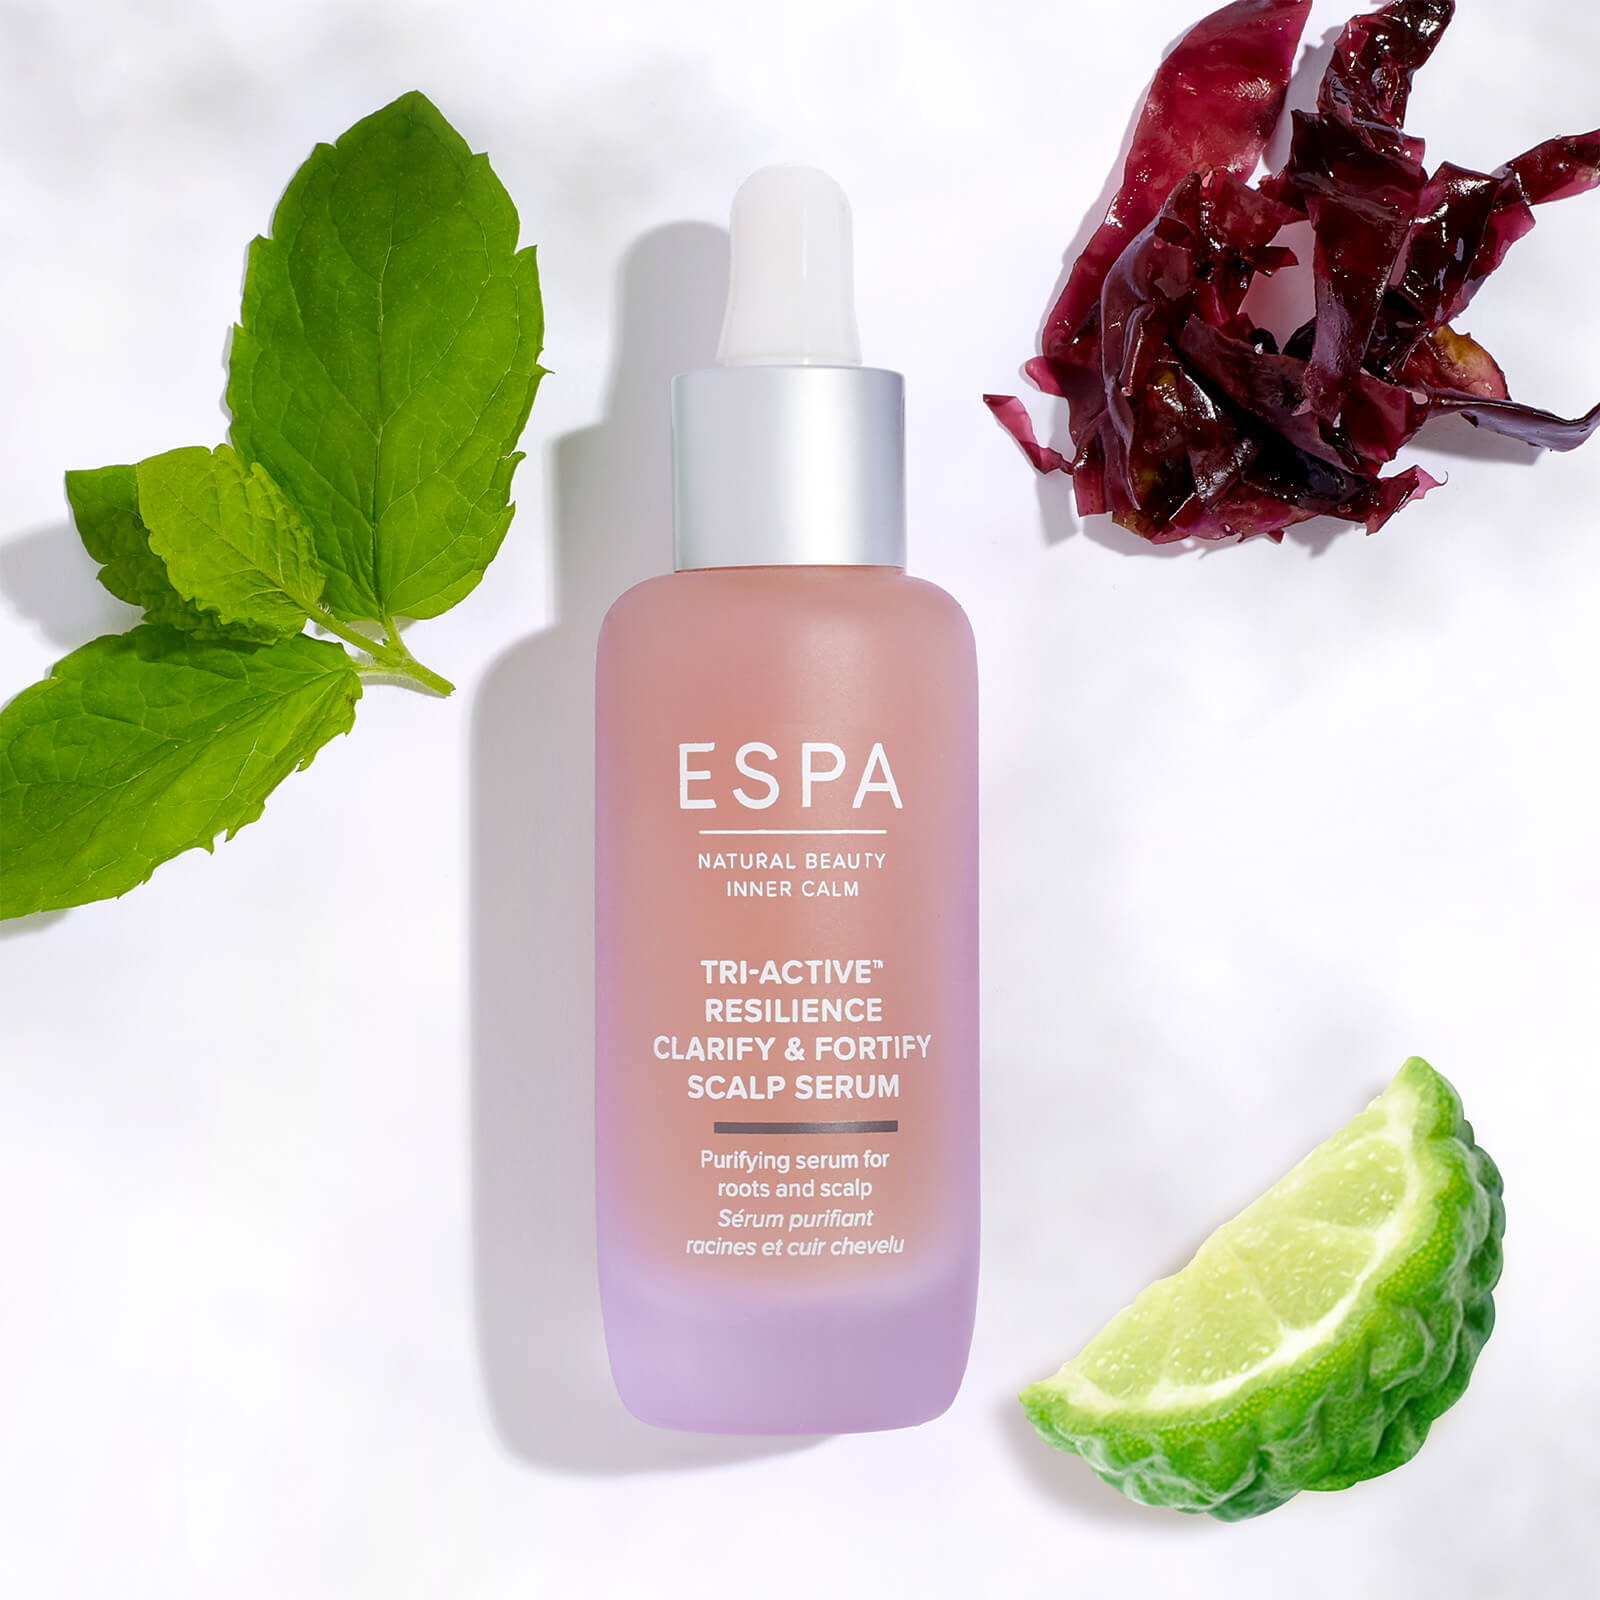 Shop Espa Tri-active Resilience Clarify & Fortify Scalp Serum